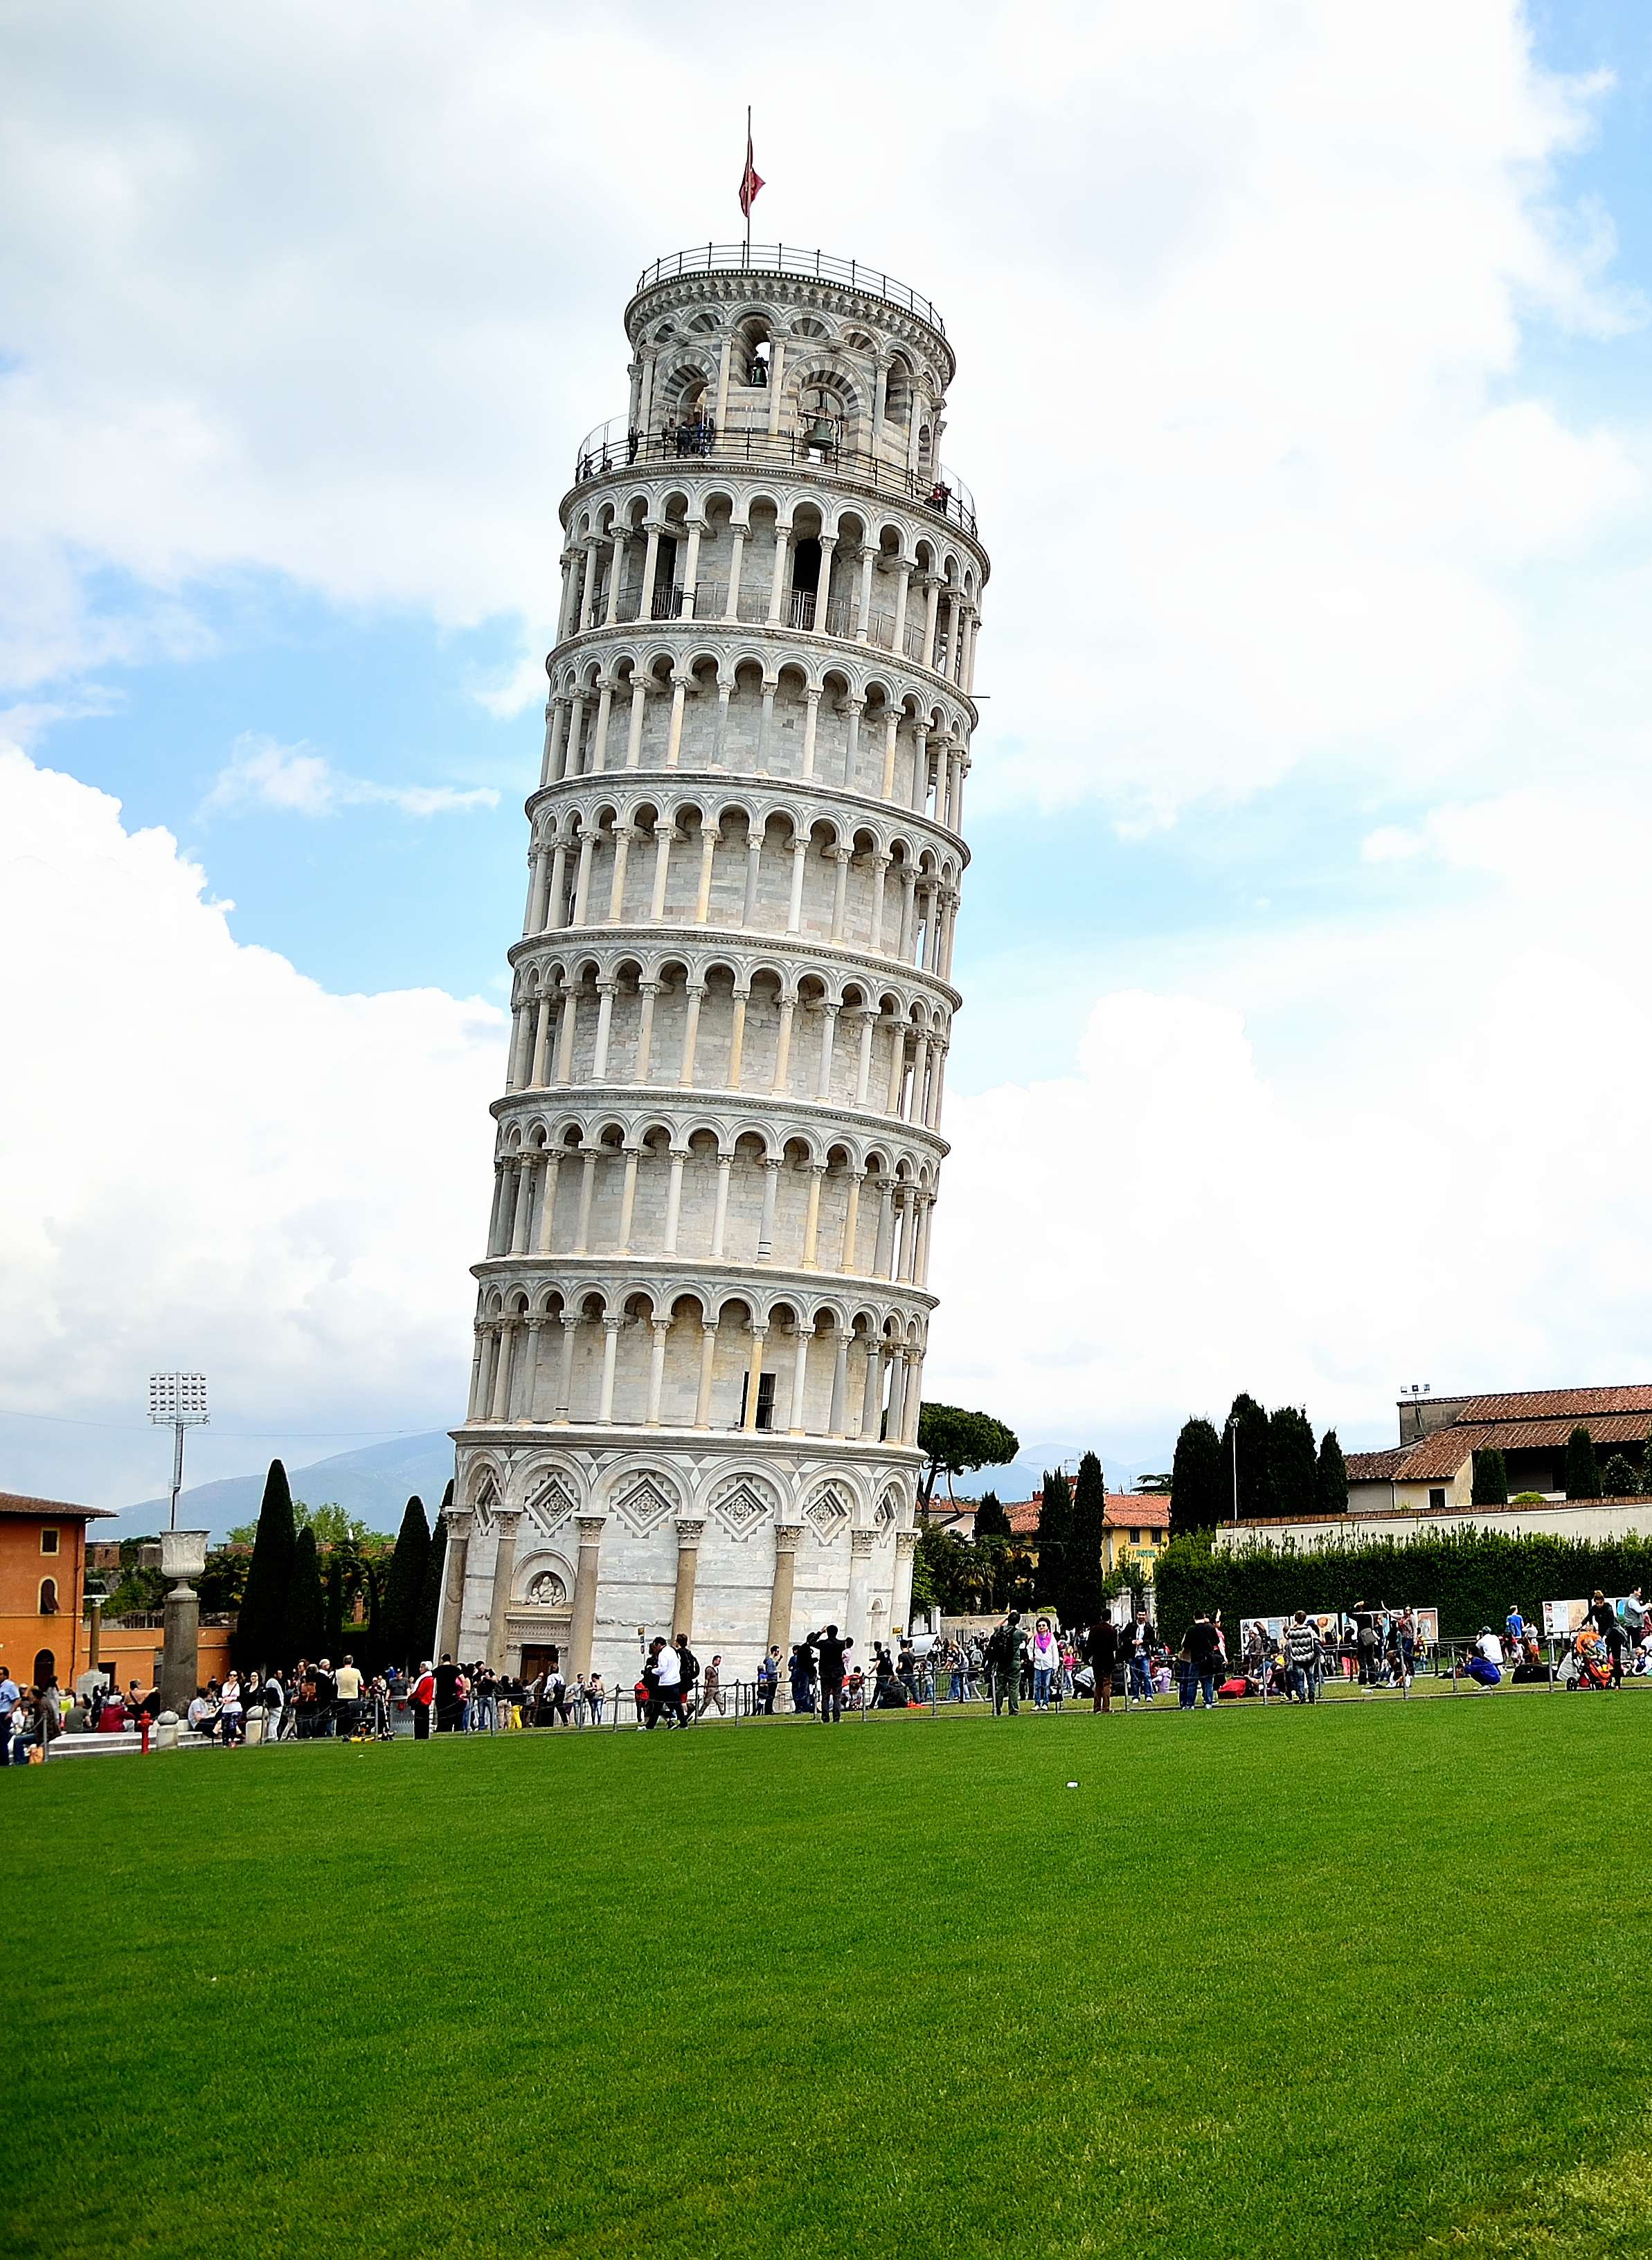 Leaning Tower of Pisa with tourists gathered around on a clear day